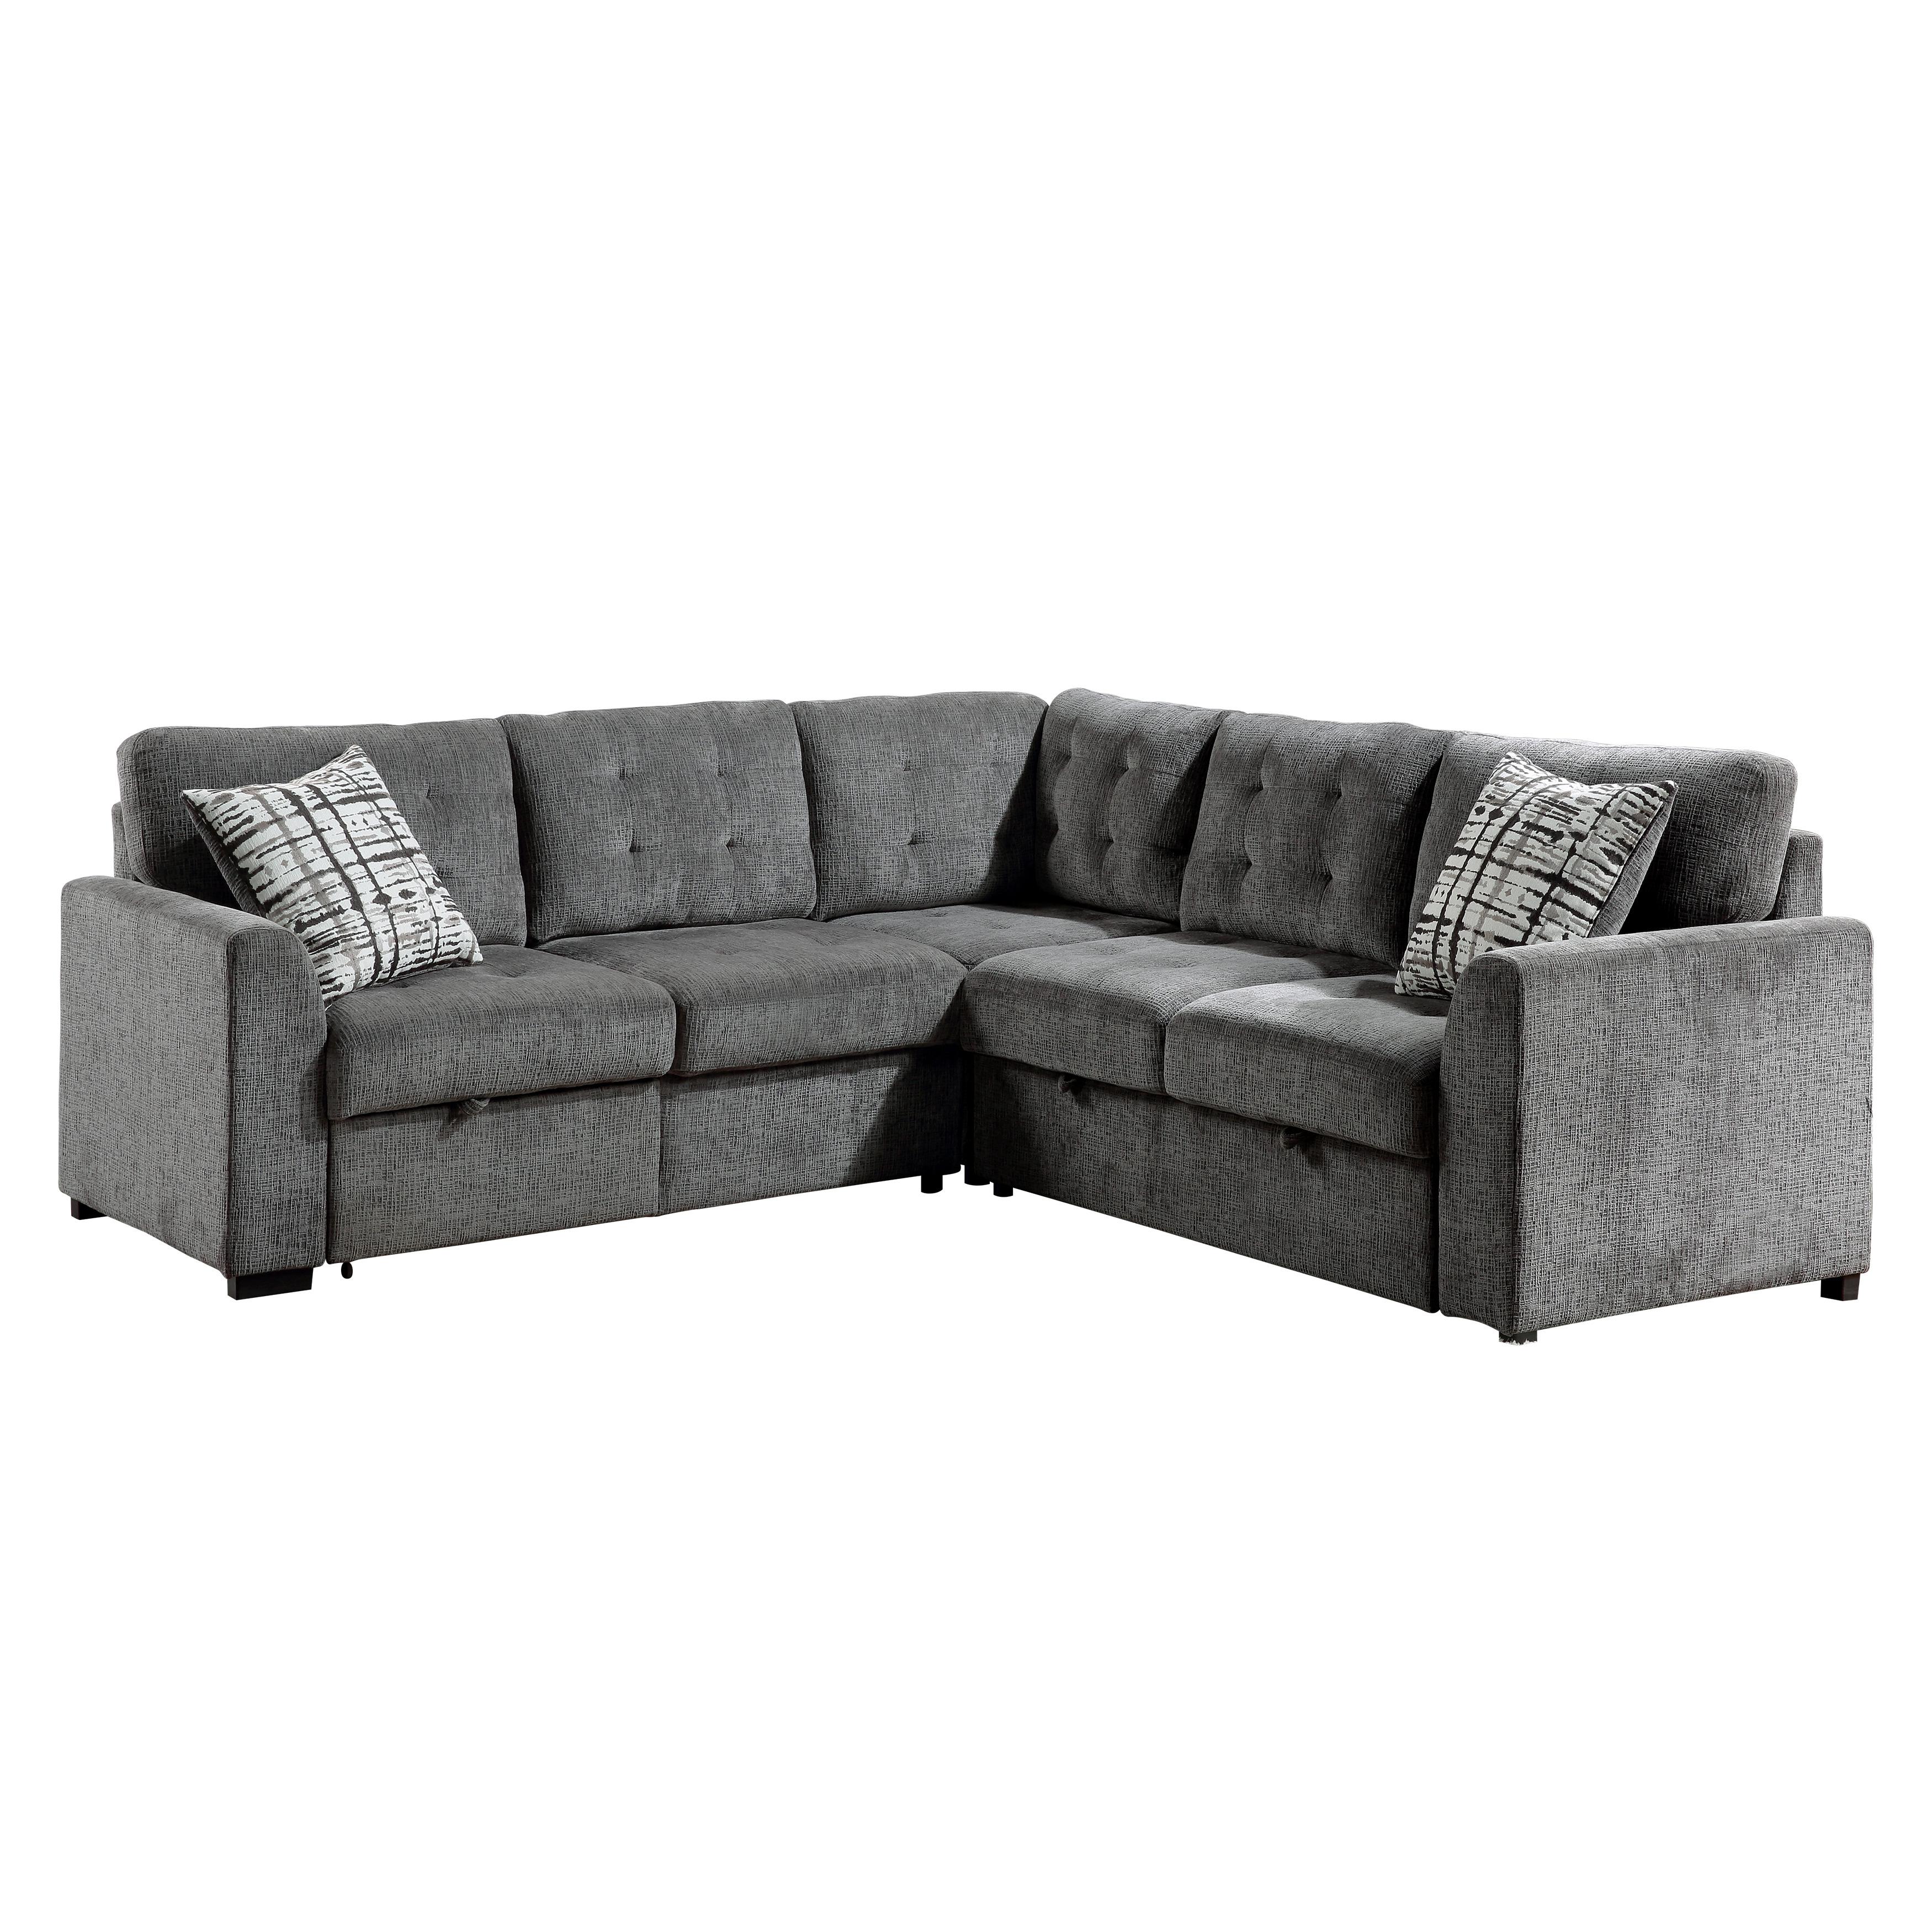 Classic Sectional 9311GY*SC Lanning 9311GY*SC in Gray Chenille